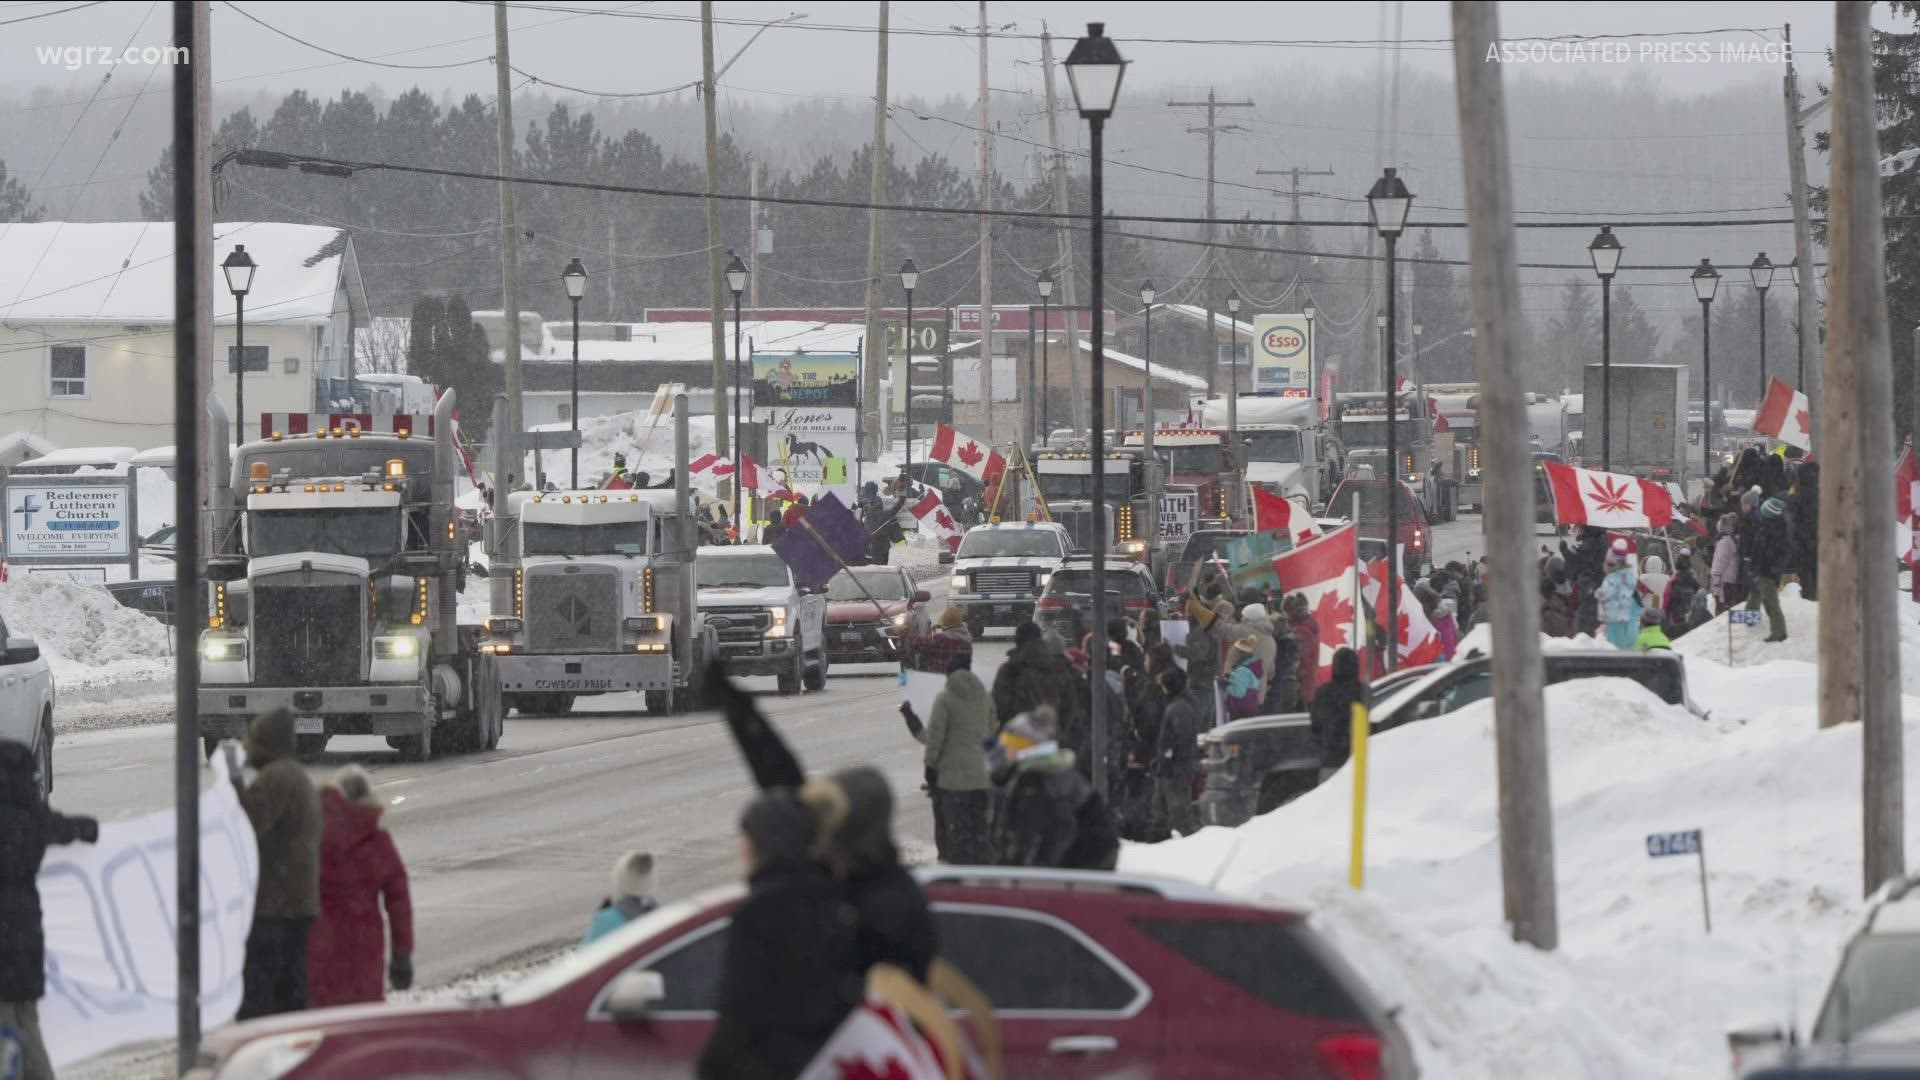 Canada is dealing with a growing protest of truckers upset with the vaccine requirement to get back into the country. They're heading to Ottawa this weekend.